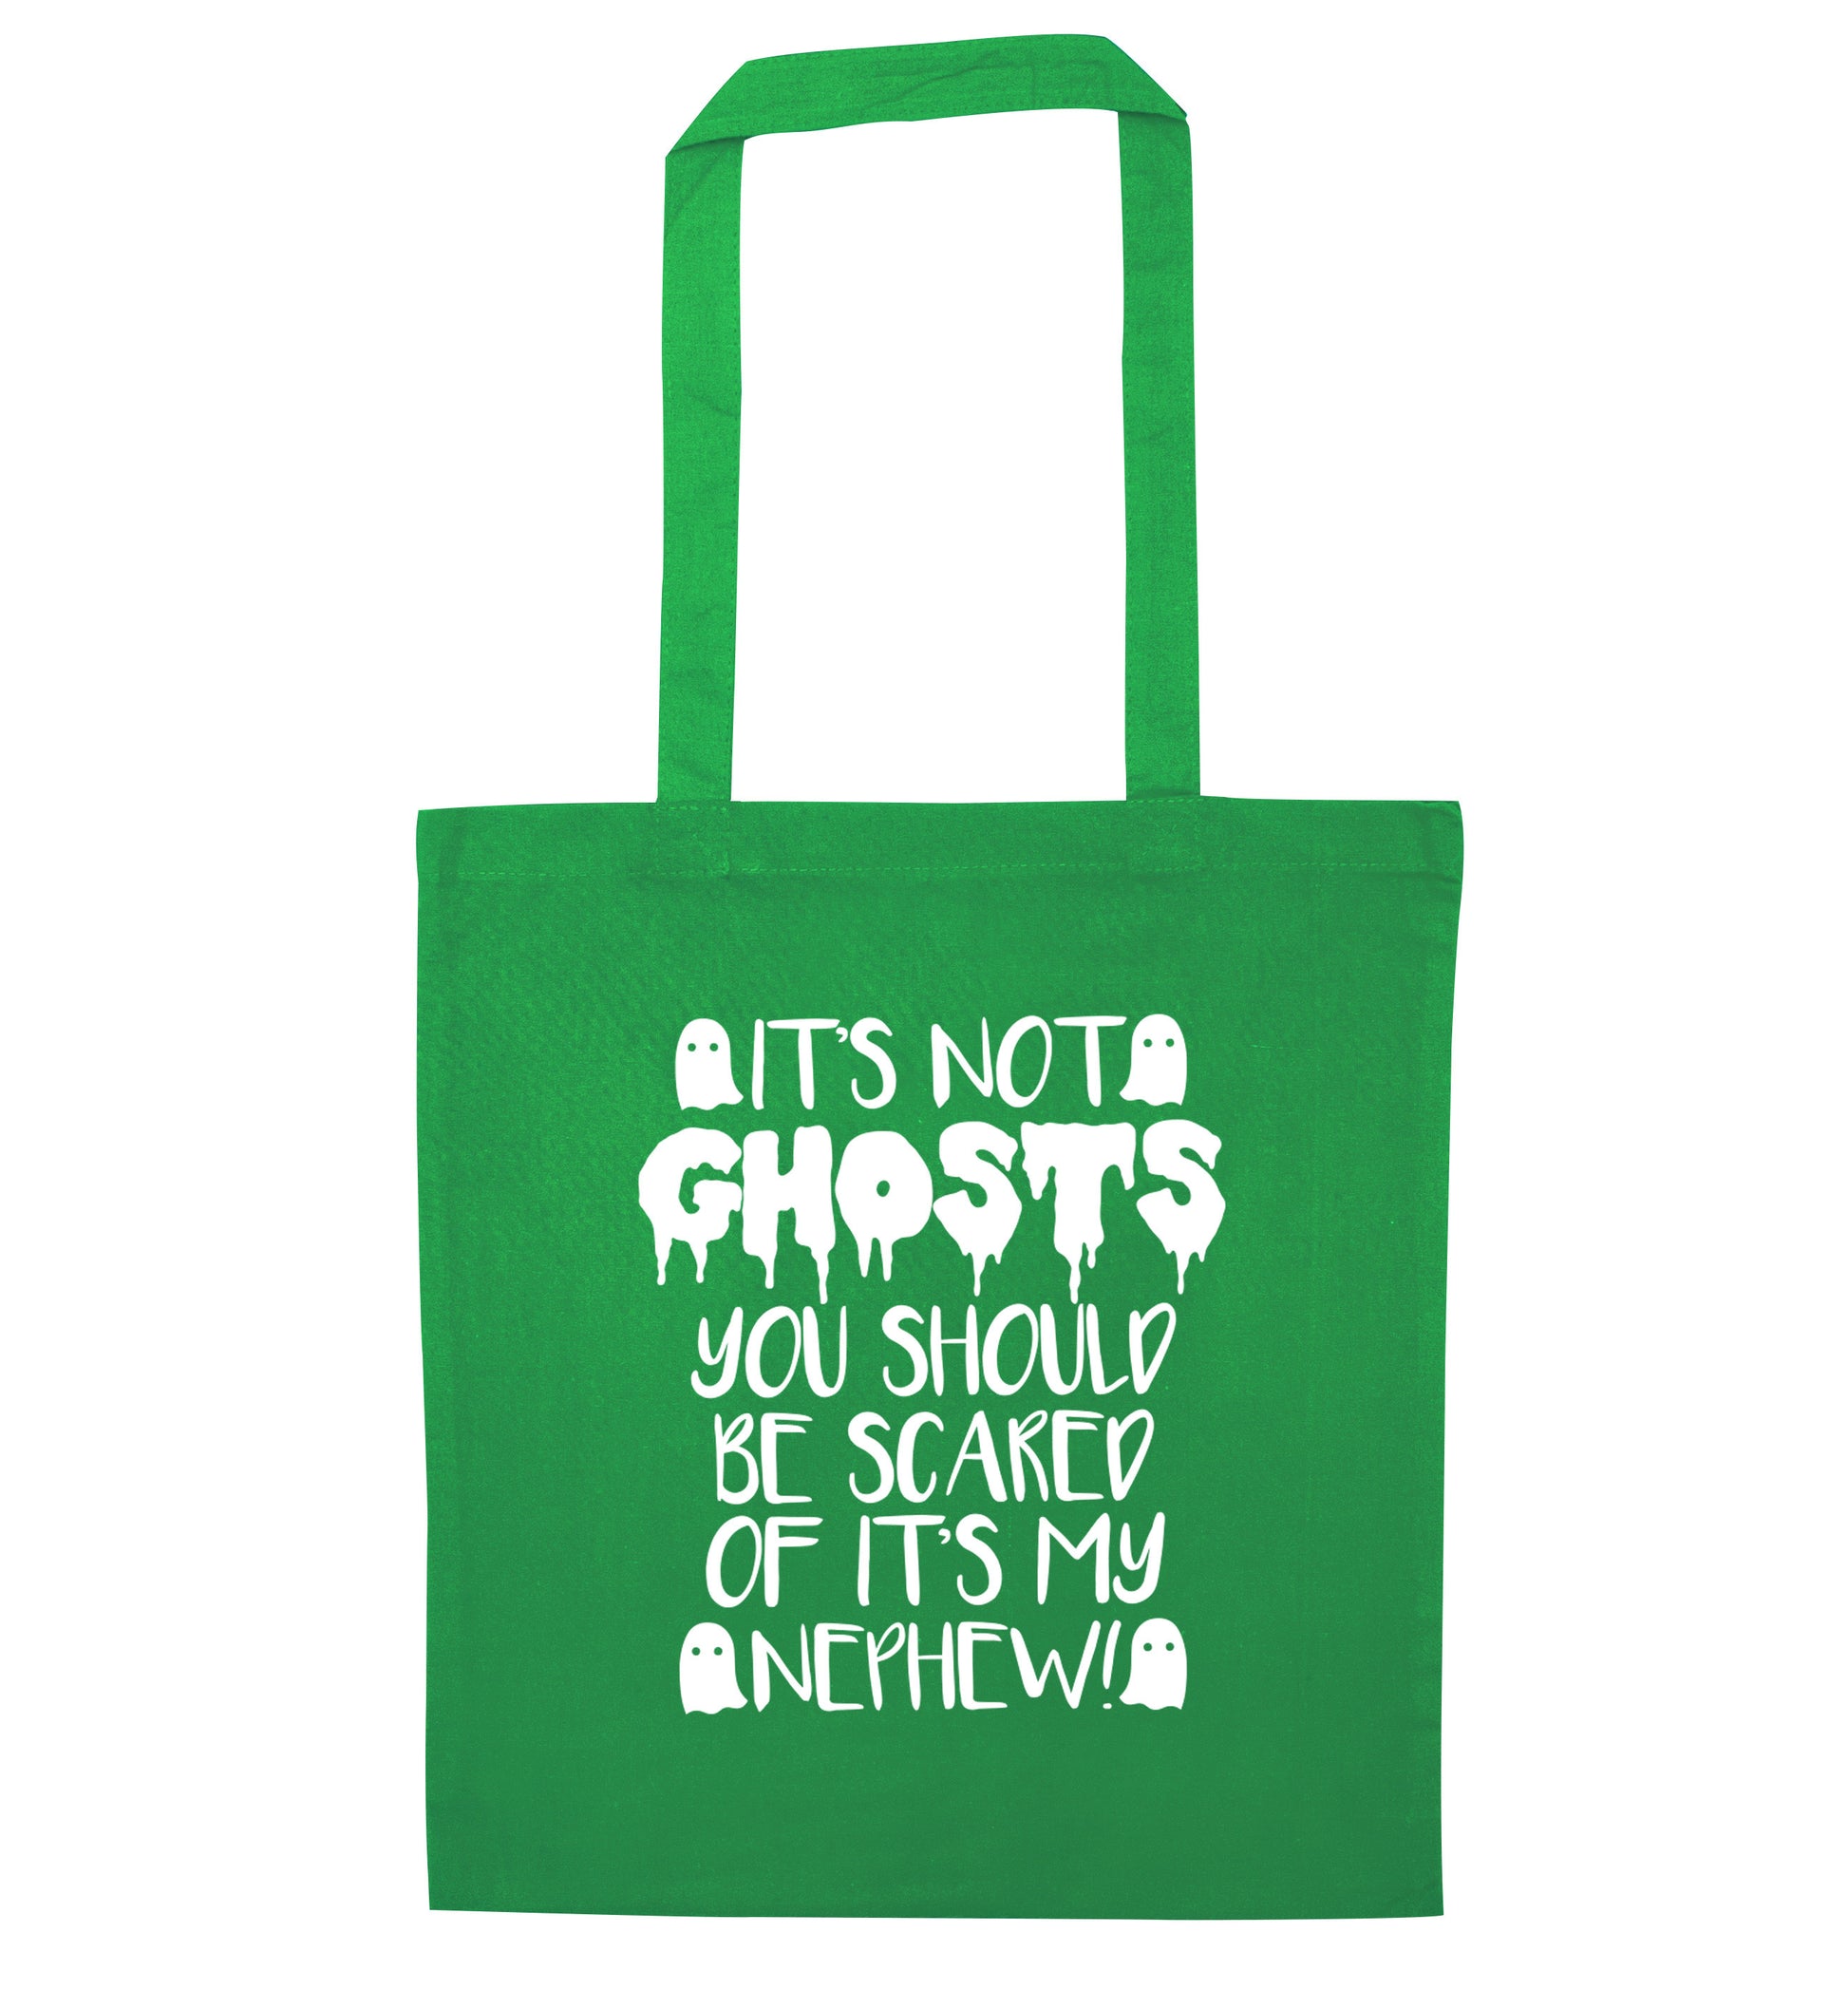 It's not ghosts you should be scared of it's my nephew! green tote bag